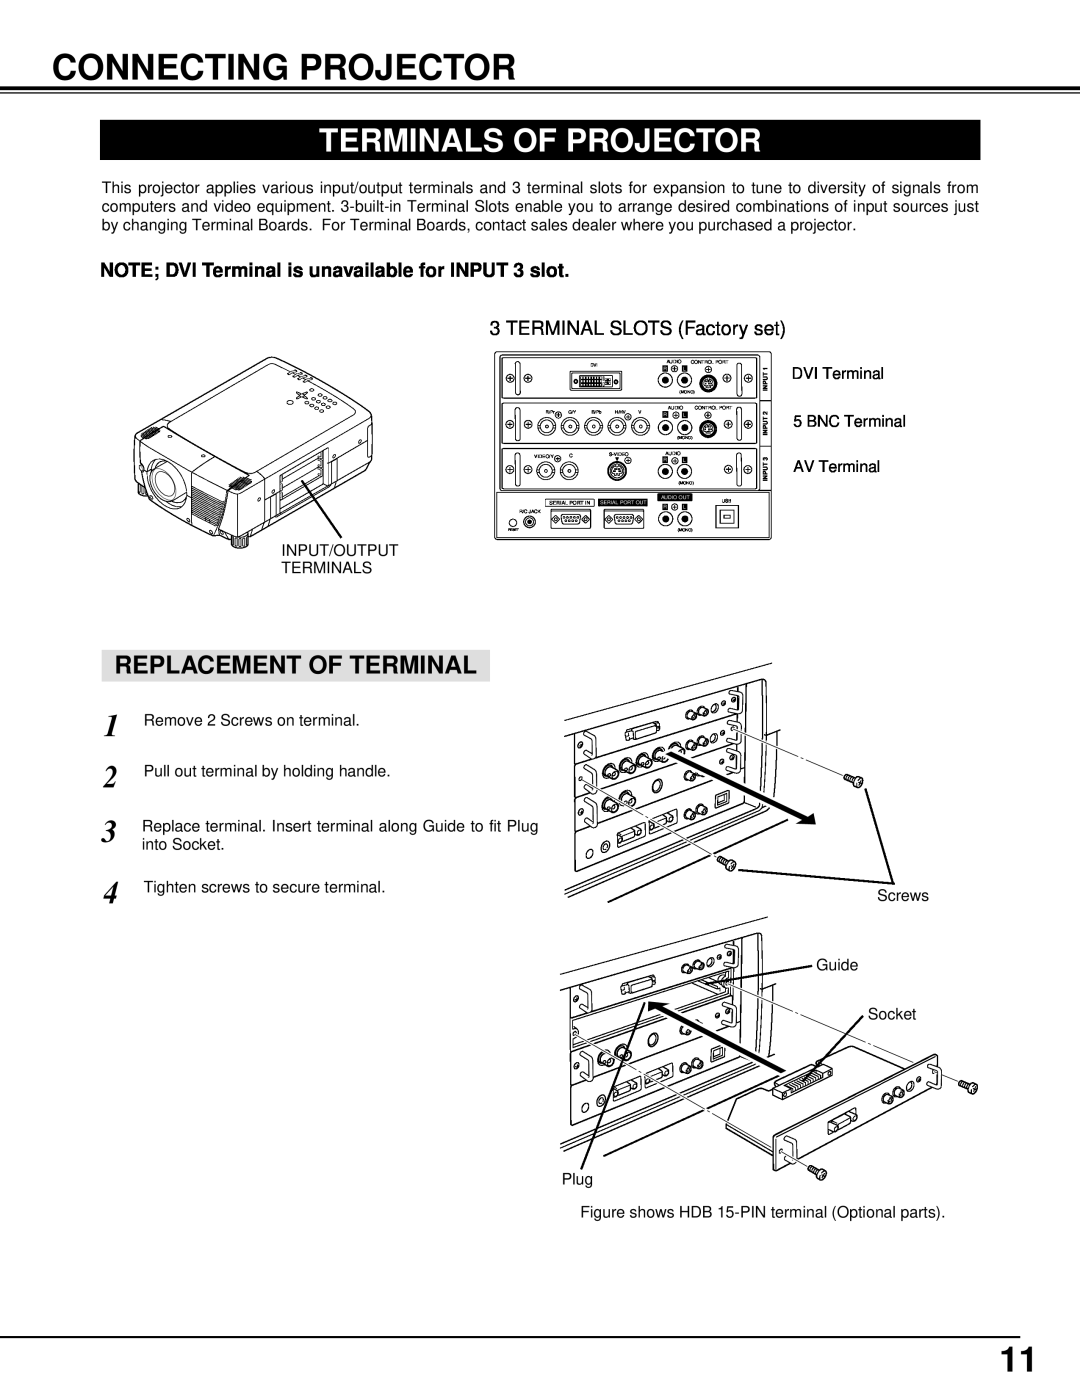 Christie Digital Systems 38-VIV301-01 user manual Connecting Projector, Terminals Of Projector, Replacement Of Terminal 